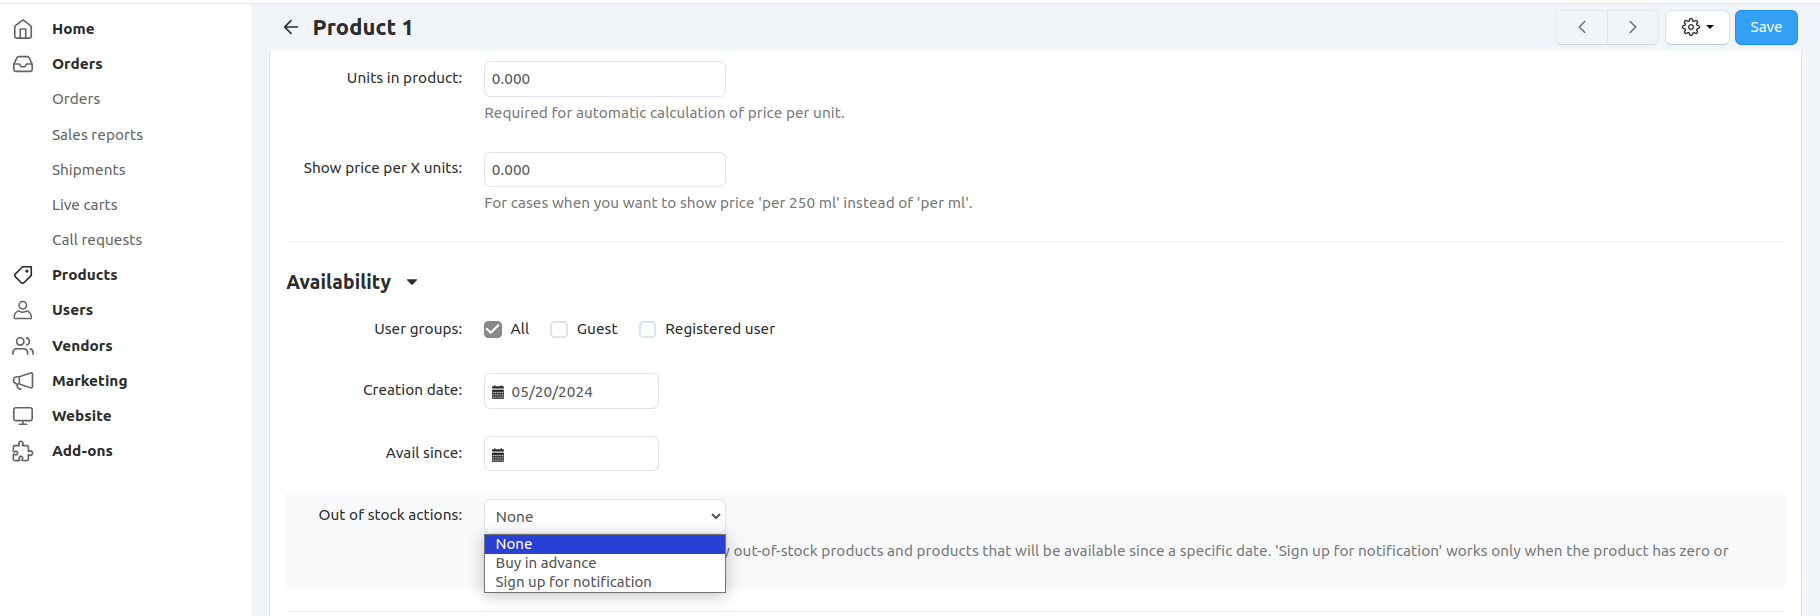 You can allow your customers to sign up for notifications and buy products in advance.